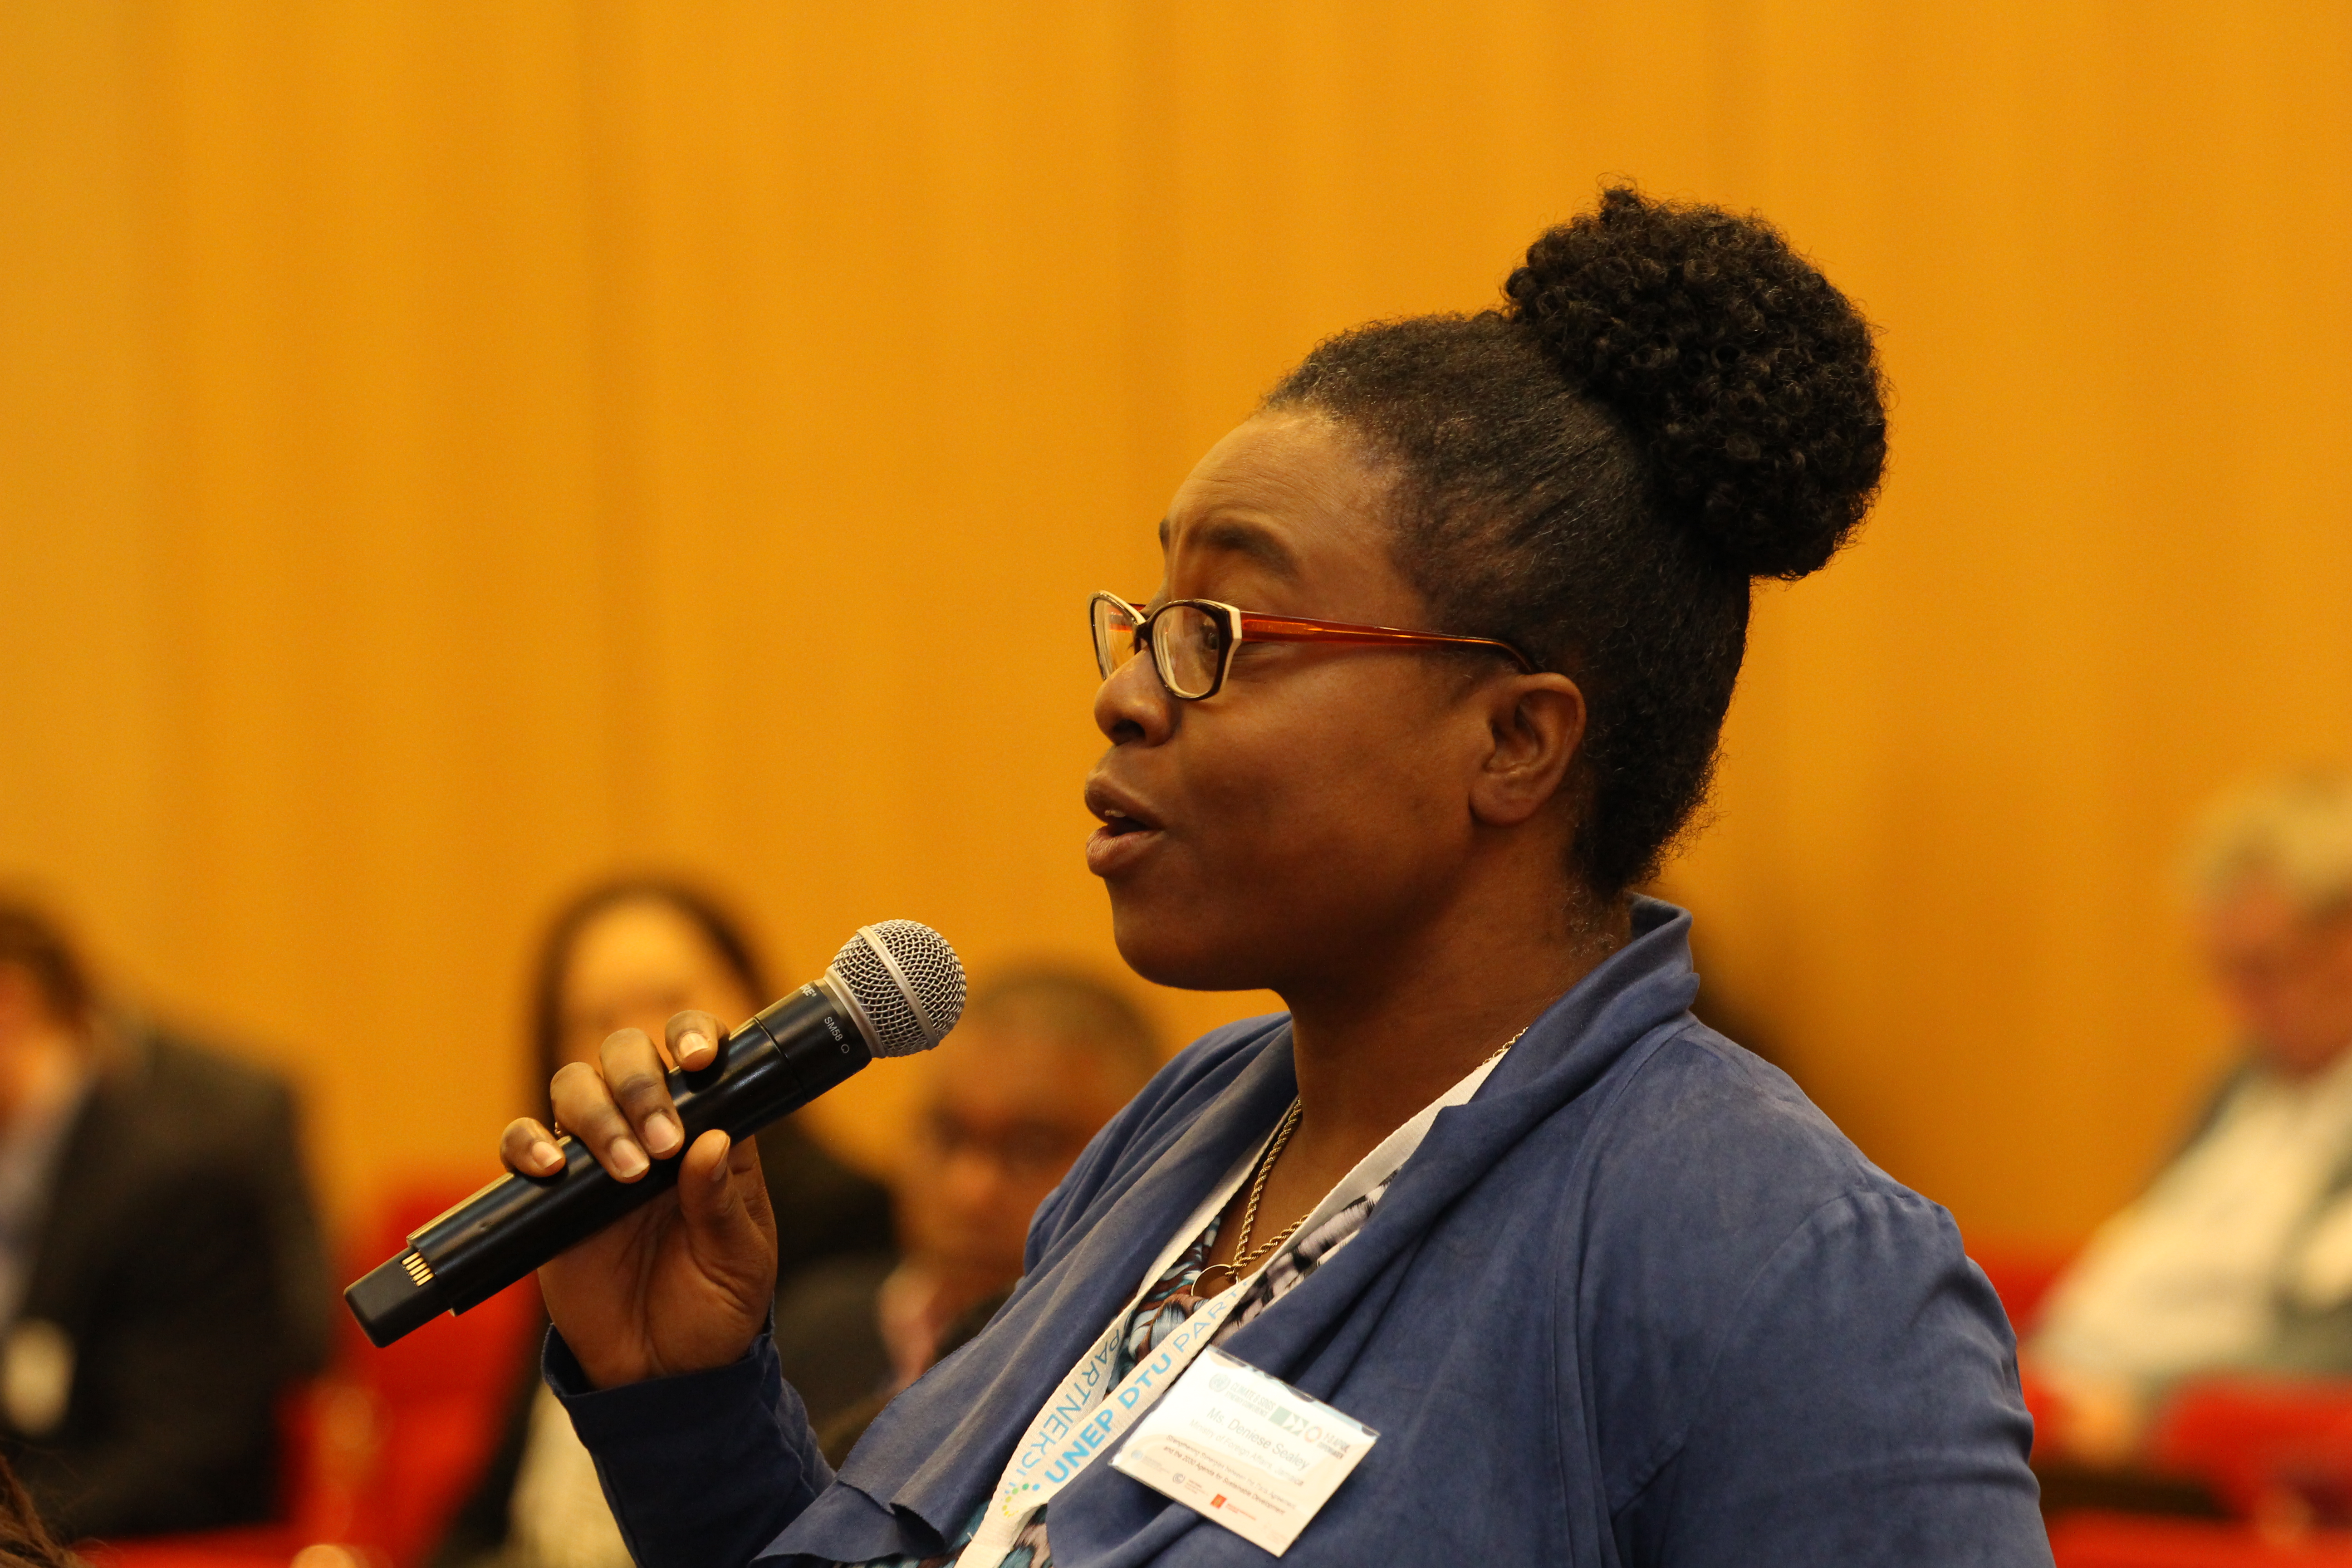 An audience member poses a question to panelists. (2)